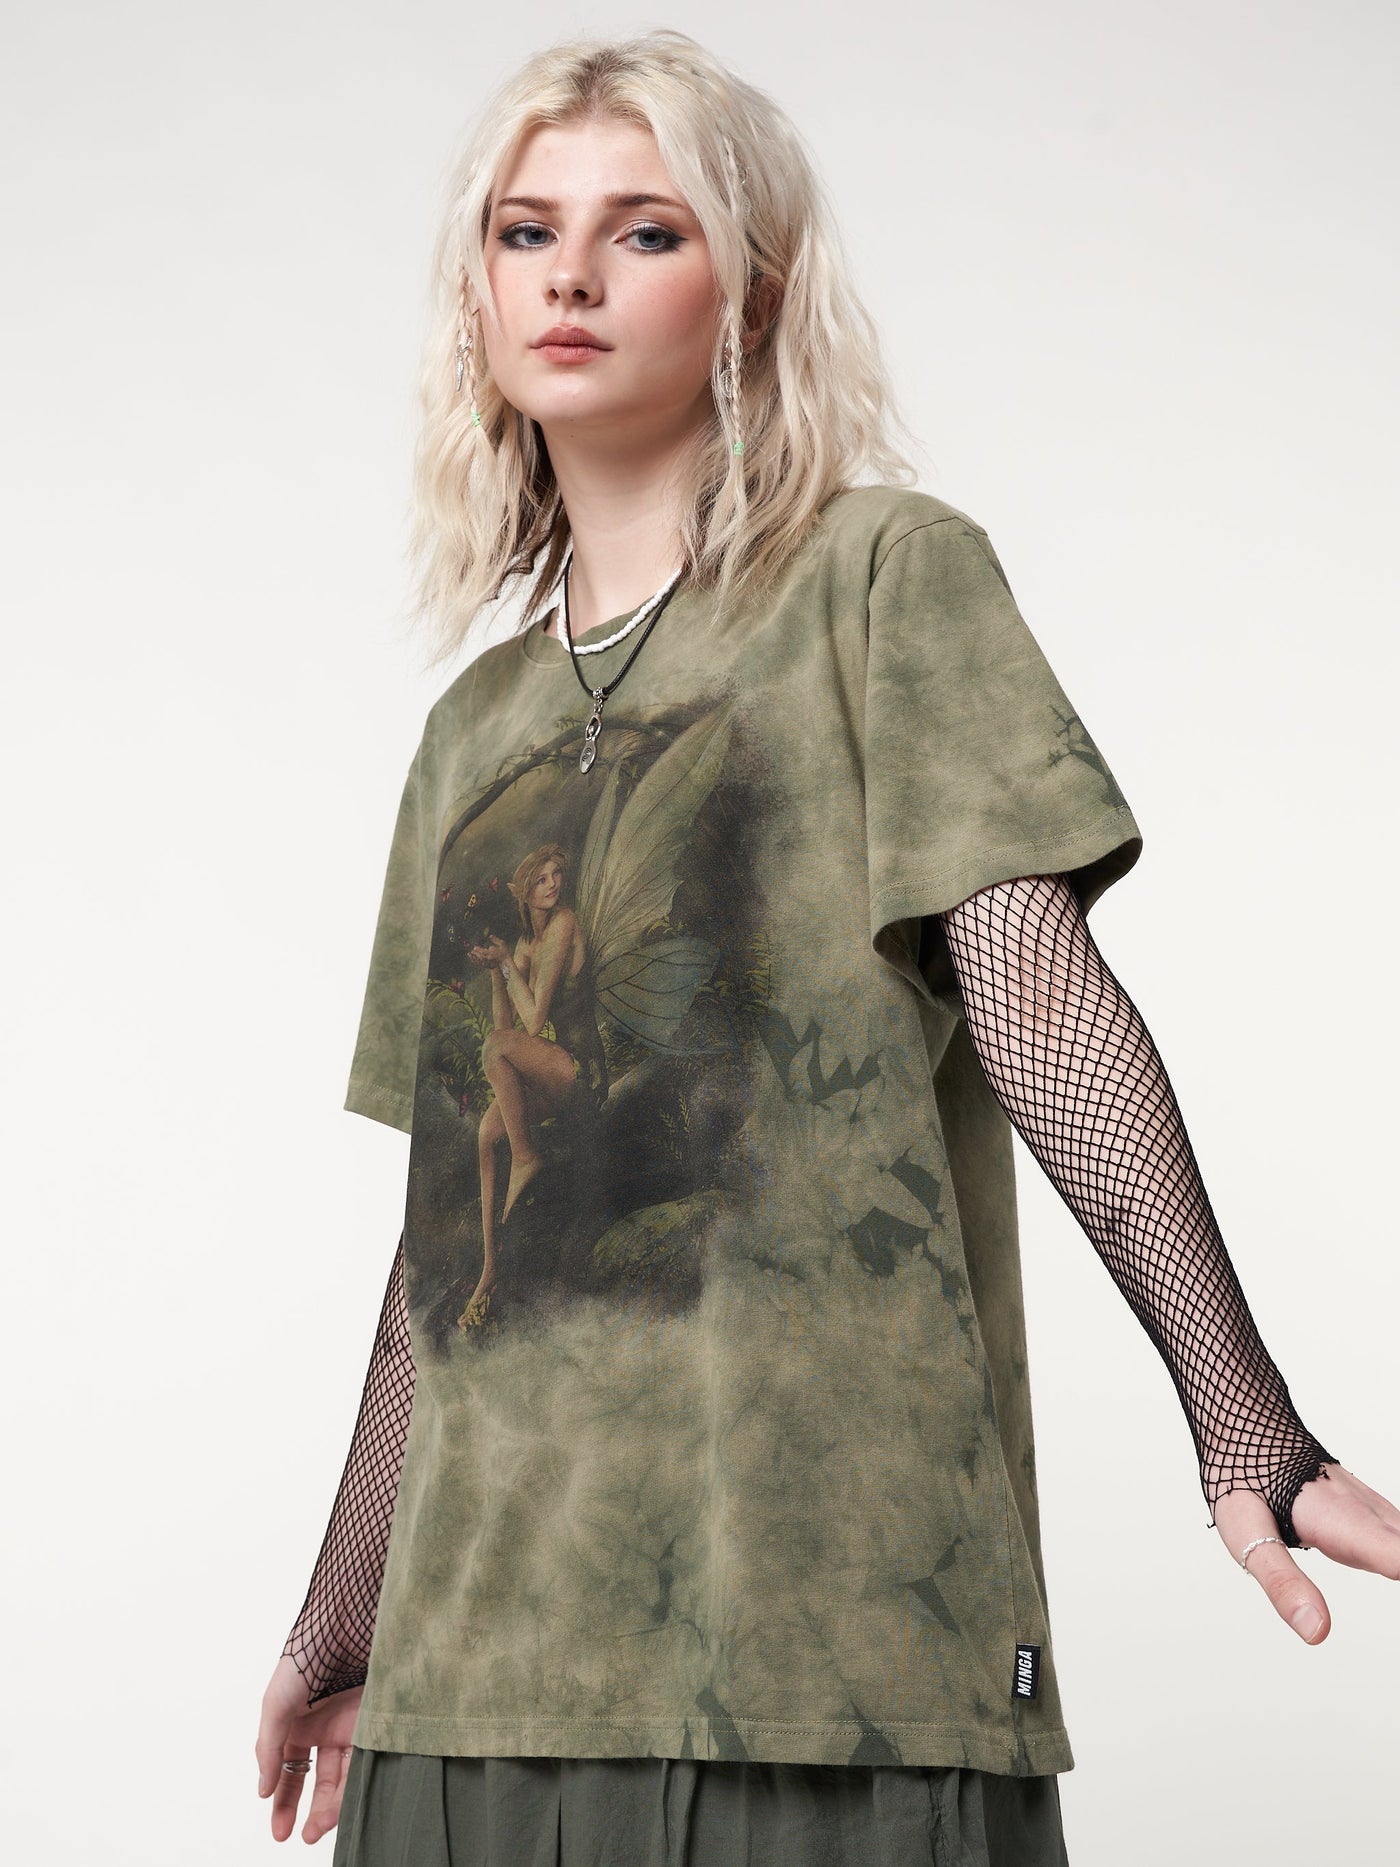 Tie dye t-shirt in olive green with forest fairy front print